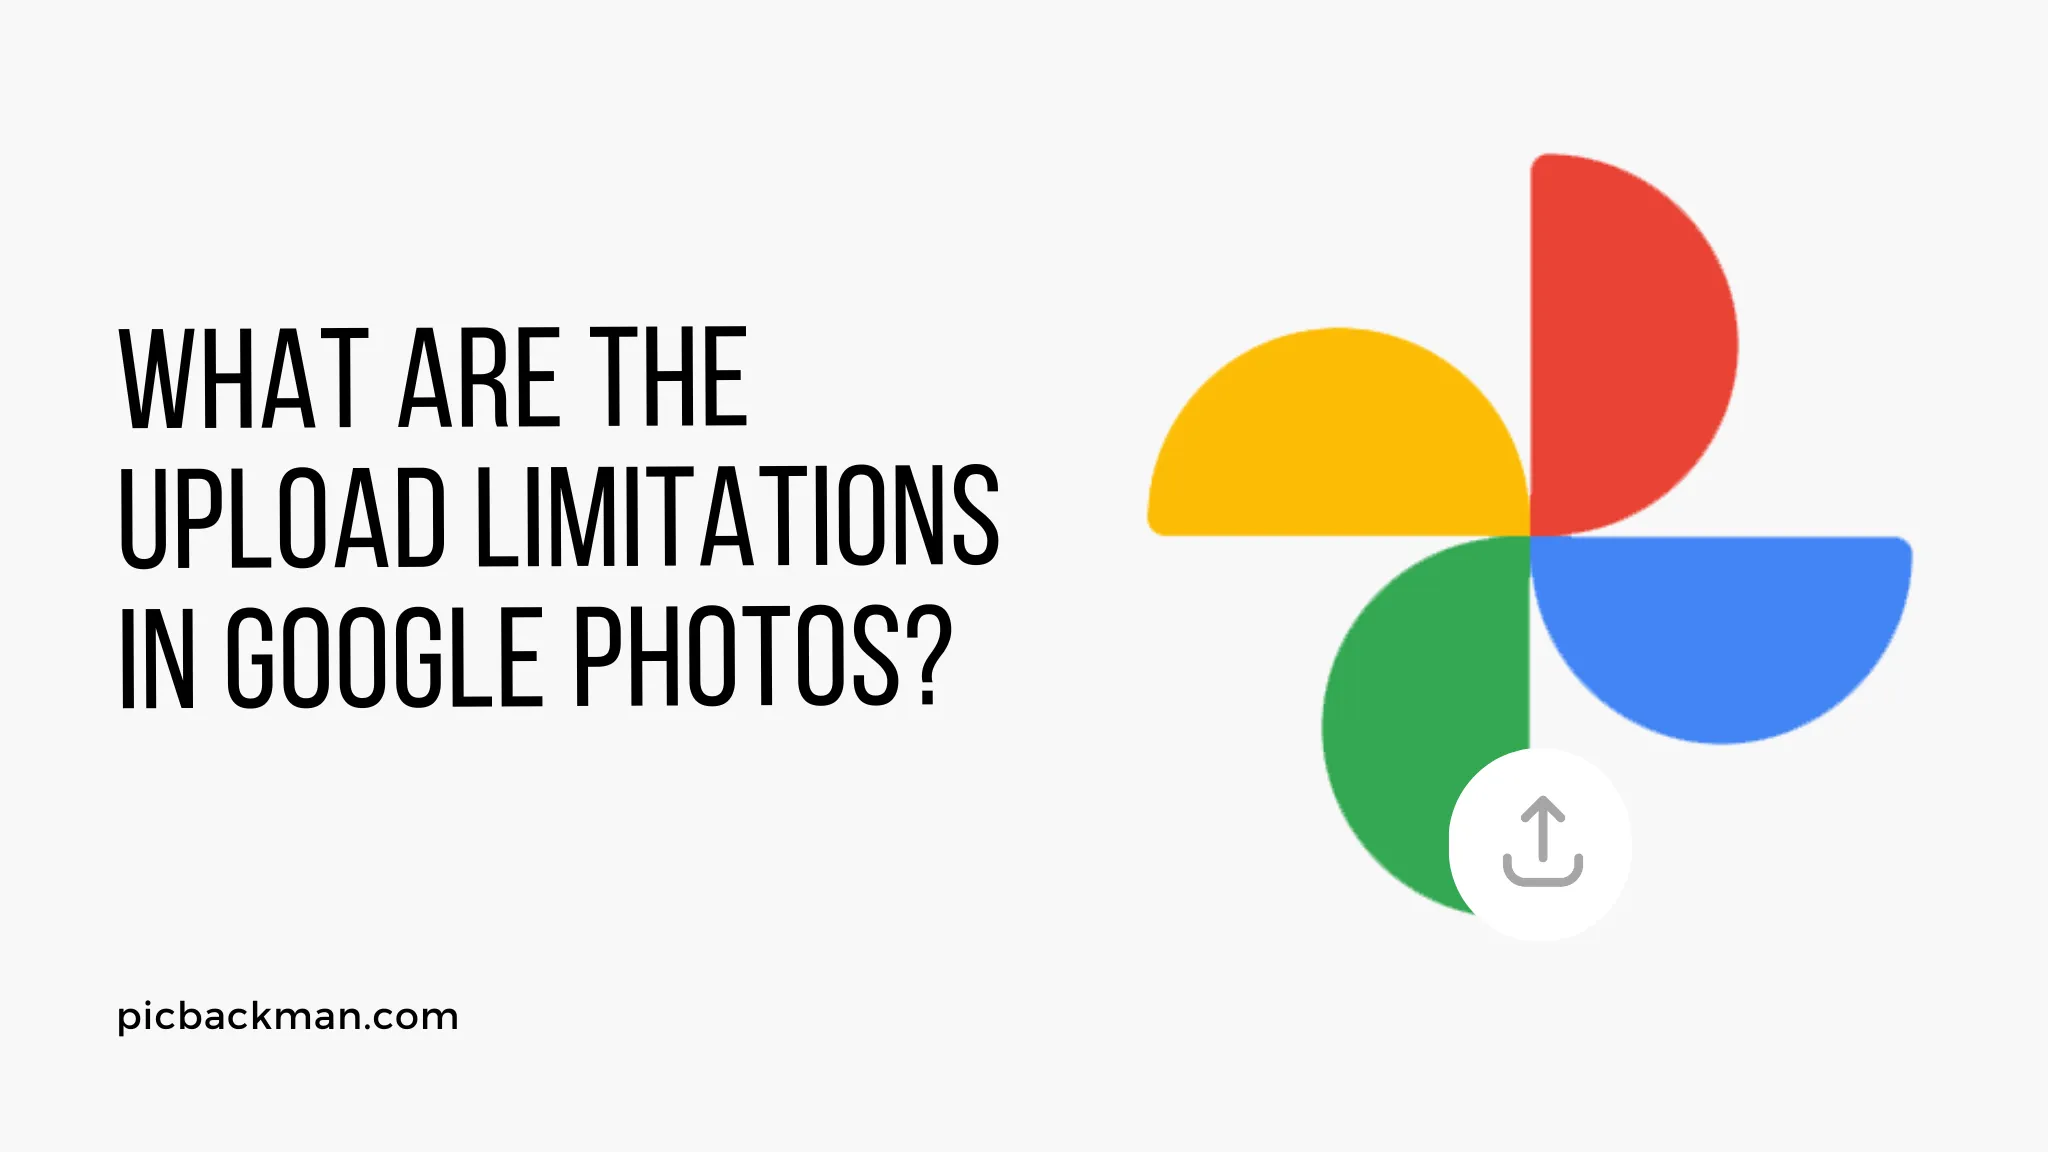 What are the Upload Limitations in Google Photos